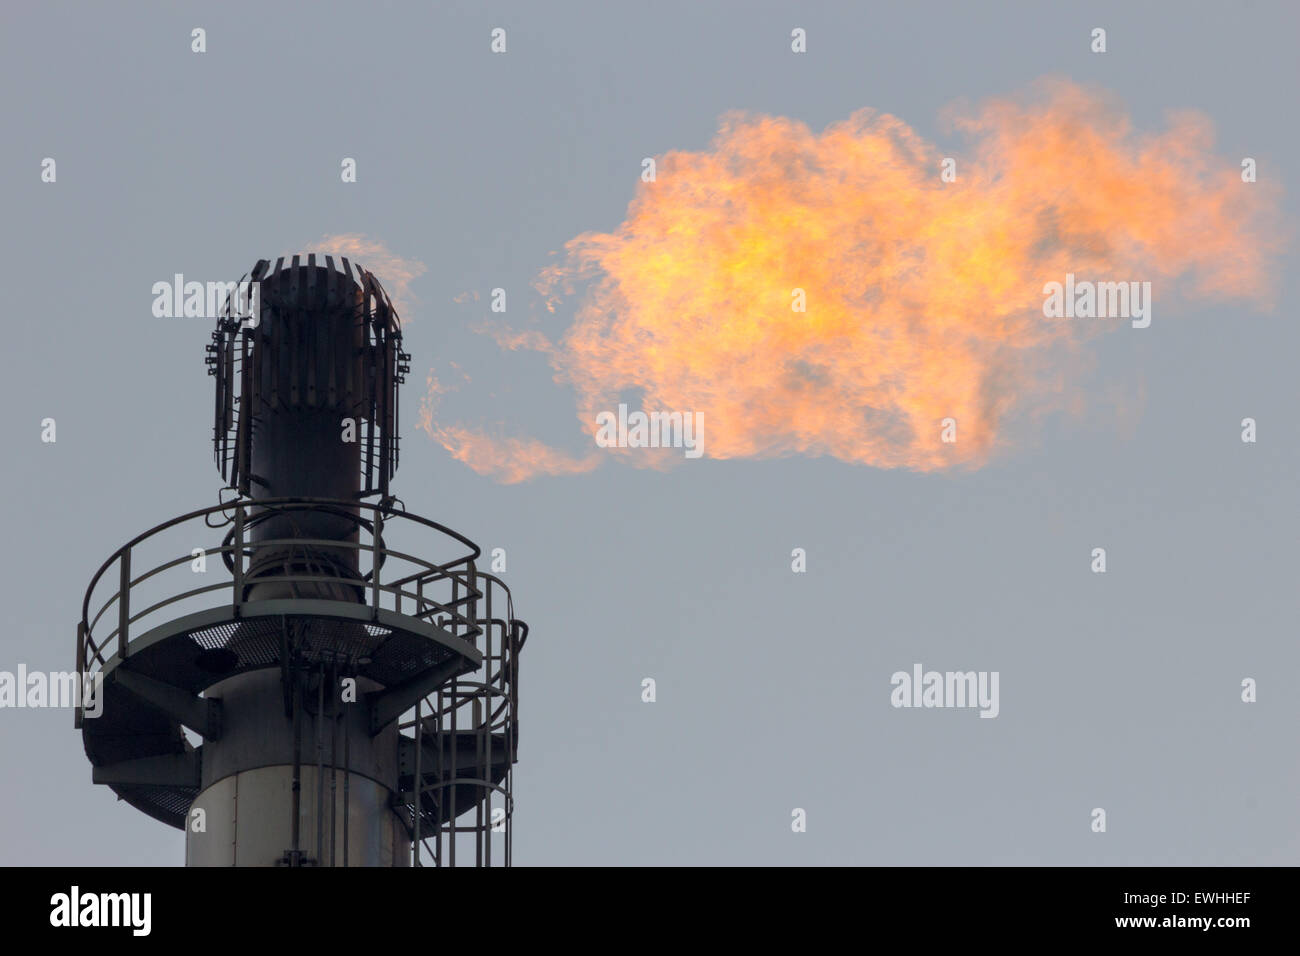 Gas flare at a refinery Stock Photo